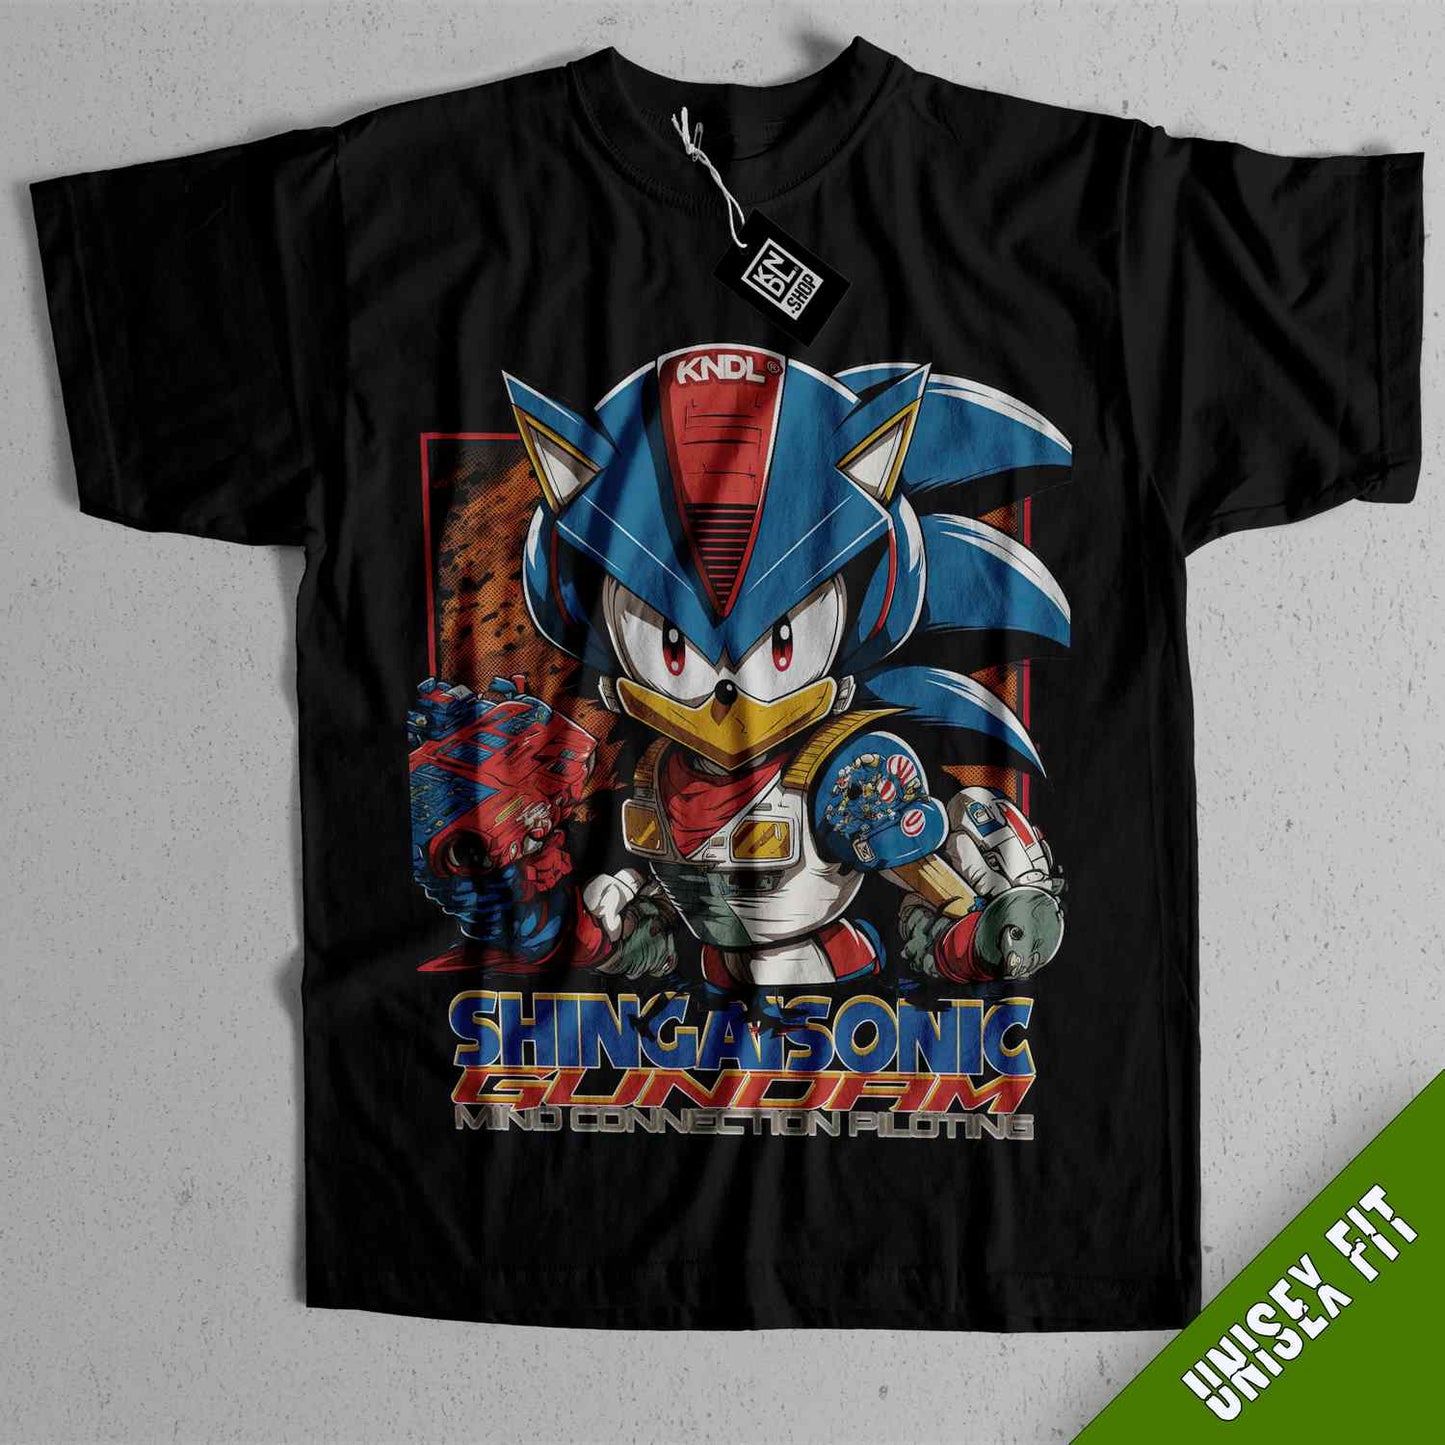 a black shirt with a sonic the hedge character on it